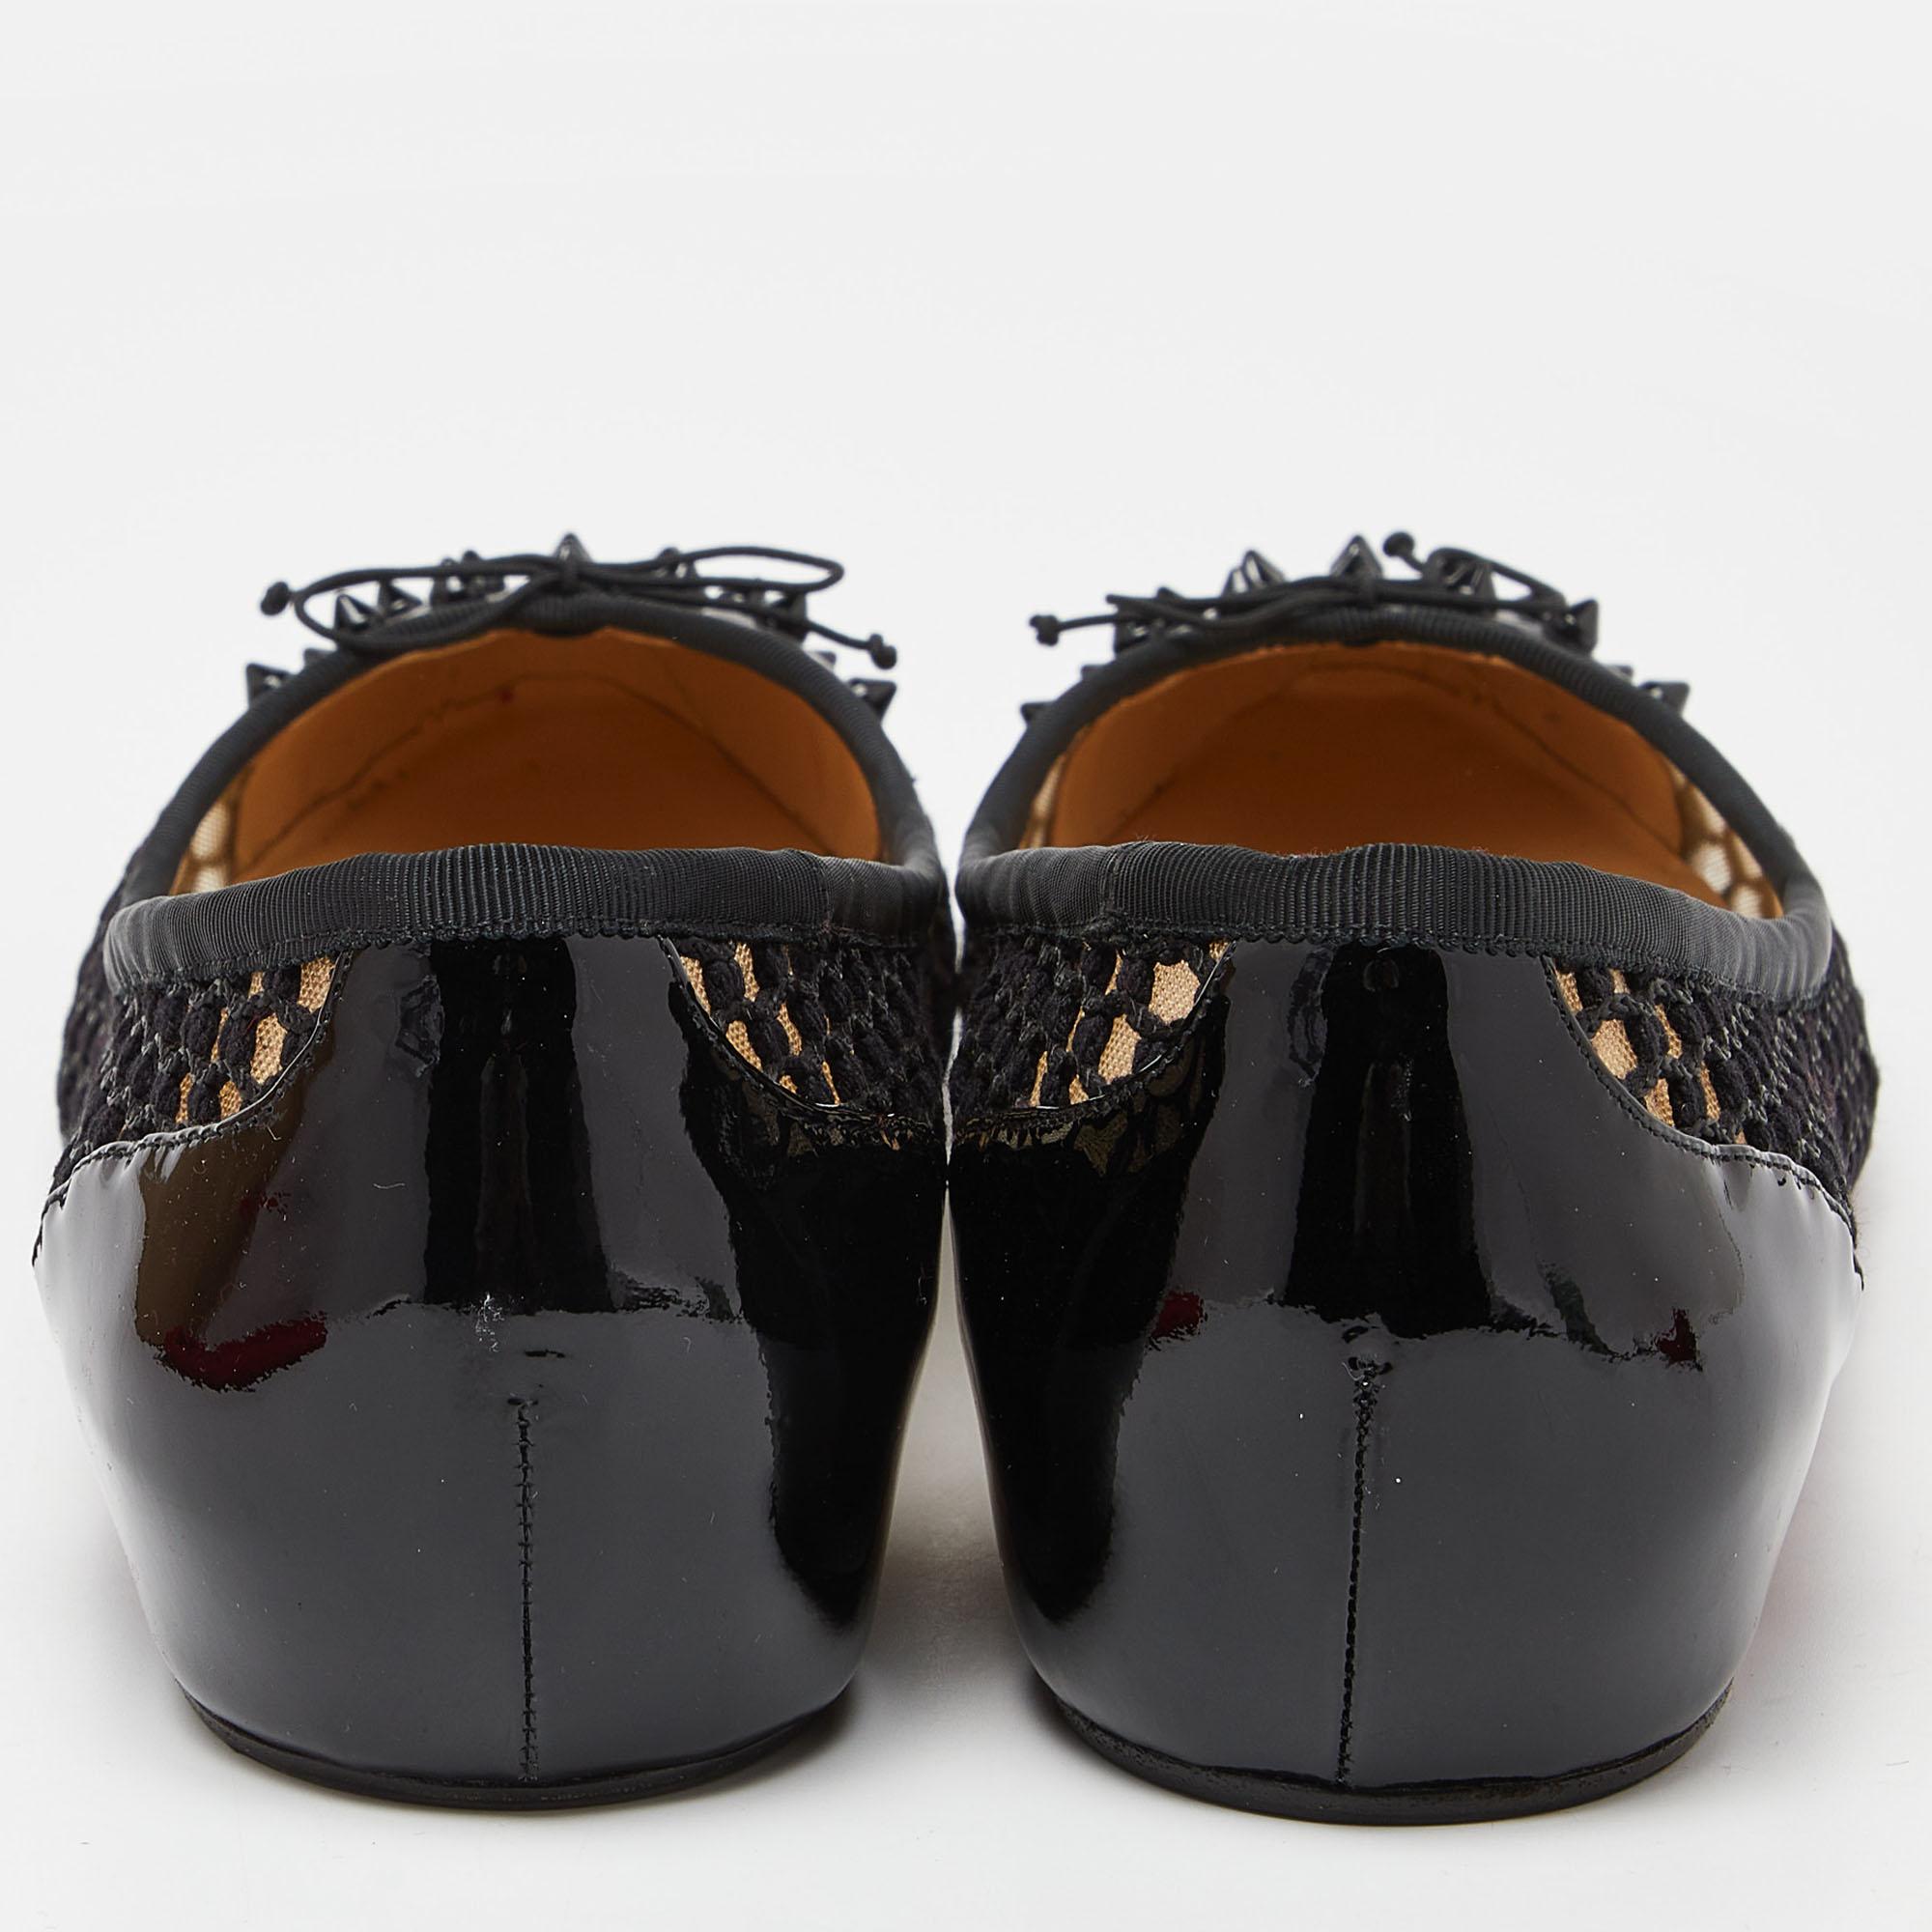 Trendy and very stylish, these ballet flats from Christian Louboutin are a must buy! The black flats have a net-like design and leather cap toes embellished with spikes. Comfortable leather-lined insoles and the signature red-lacquered soles